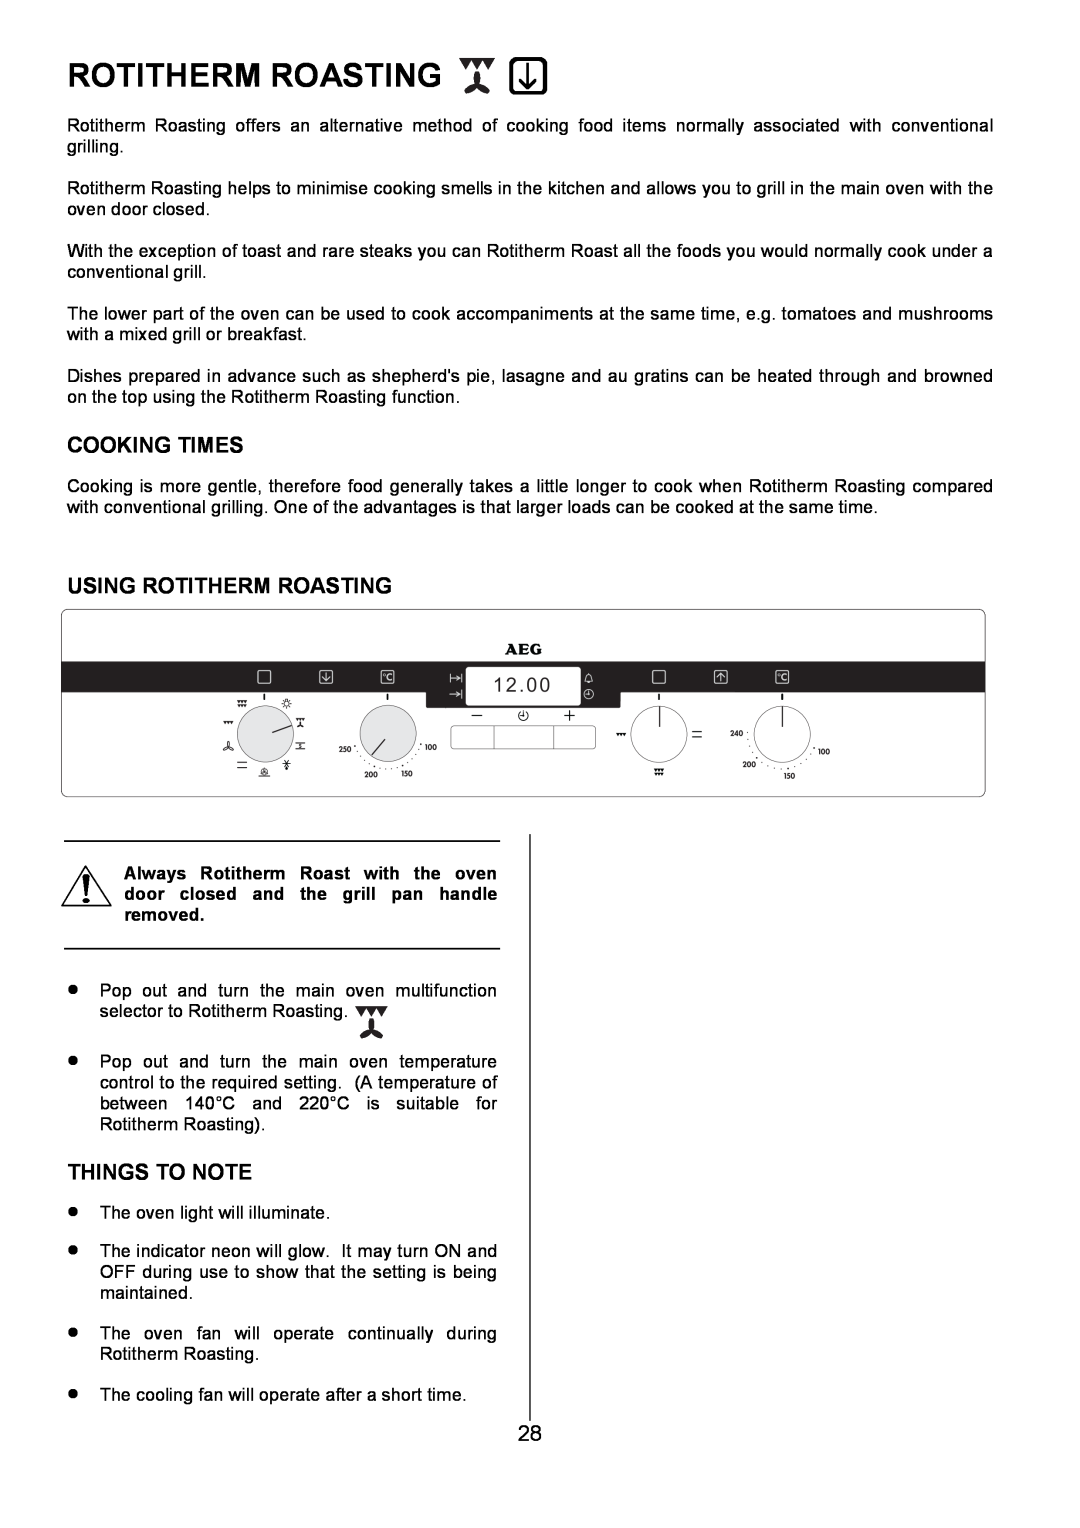 Electrolux D4101-4 operating instructions Using Rotitherm Roasting, Cooking Times, Things To Note, 1 2 